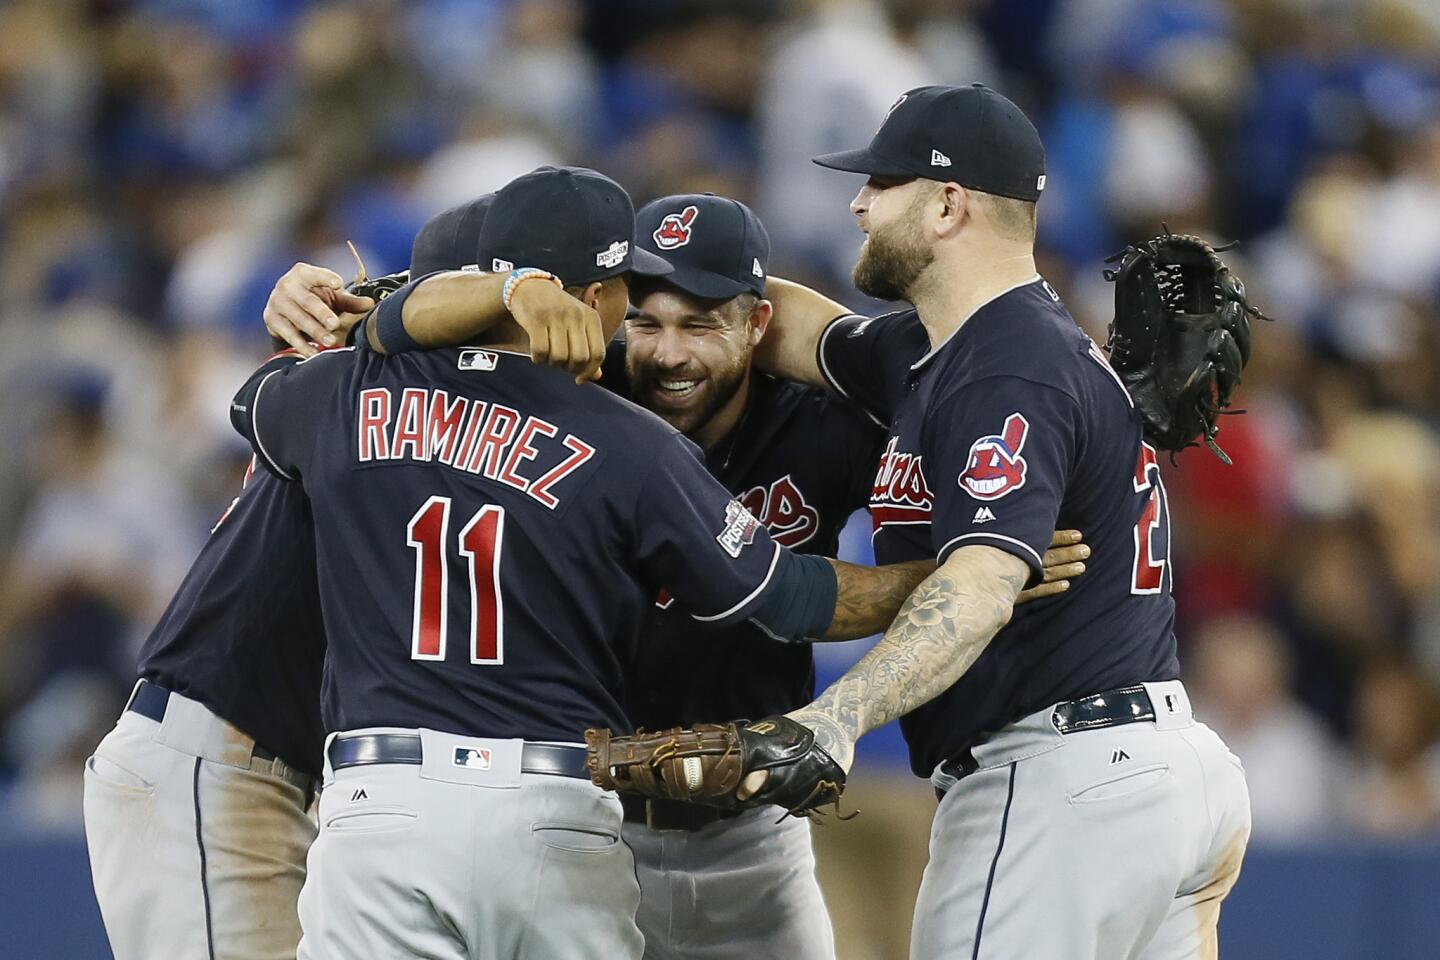 Oct 17, 2016; Toronto, Ontario, CAN; Cleveland Indians third baseman Jose Ramirez (11), second baseman Jason Kipnis (center), and first baseman Mike Napoli (right) celebrate after game three of the 2016 ALCS playoff baseball series against the Toronto Blue Jays at Rogers Centre. Mandatory Credit: John E. Sokolowski-USA TODAY Sports ** Usable by SD ONLY **